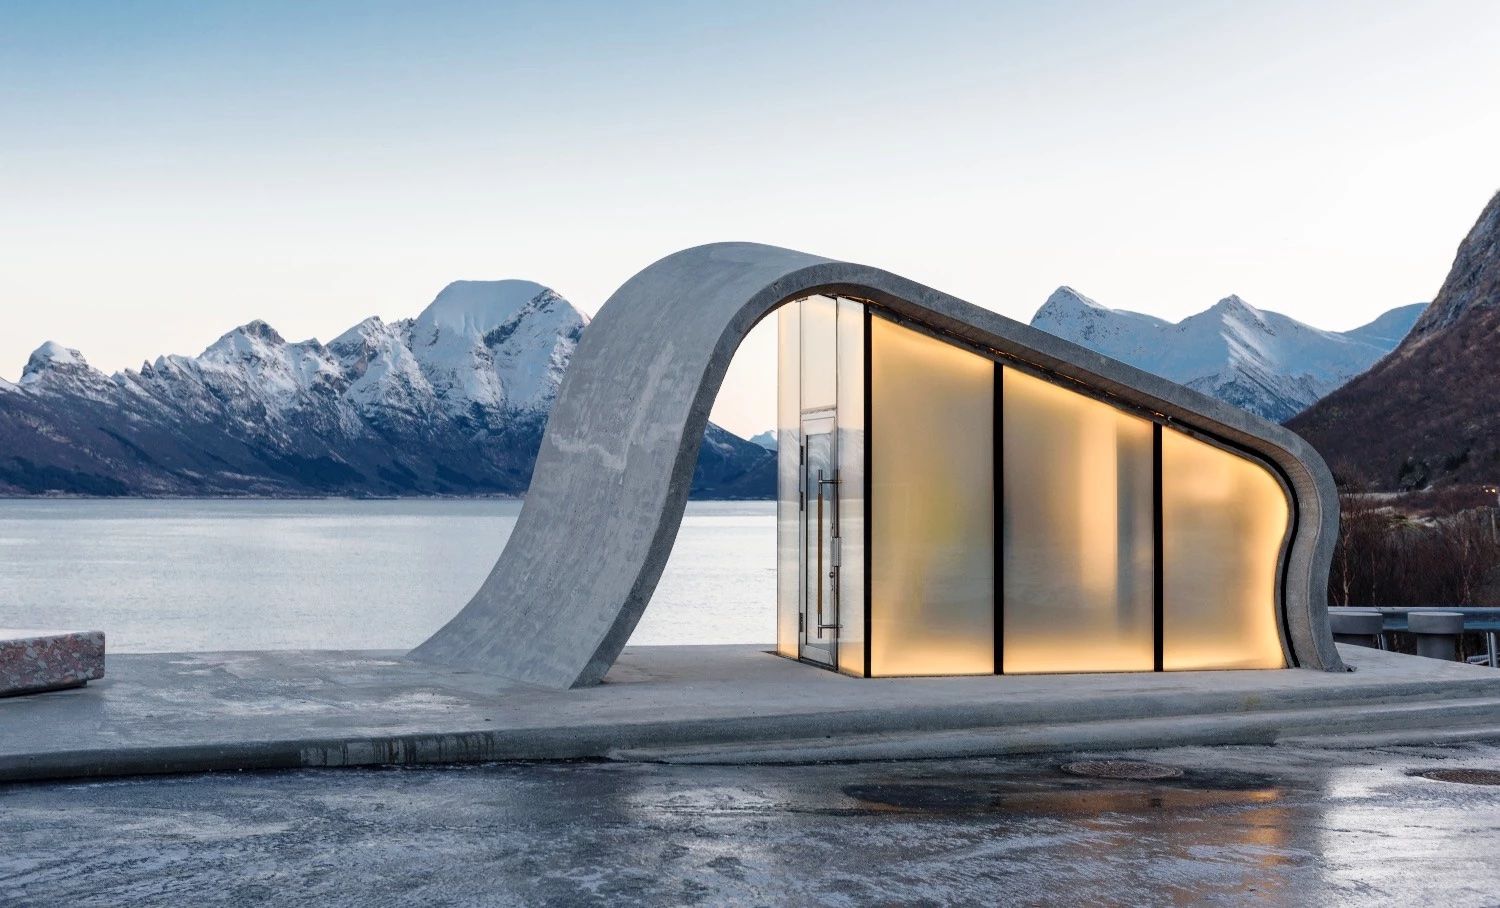 Public toilets in Norway with beautiful views